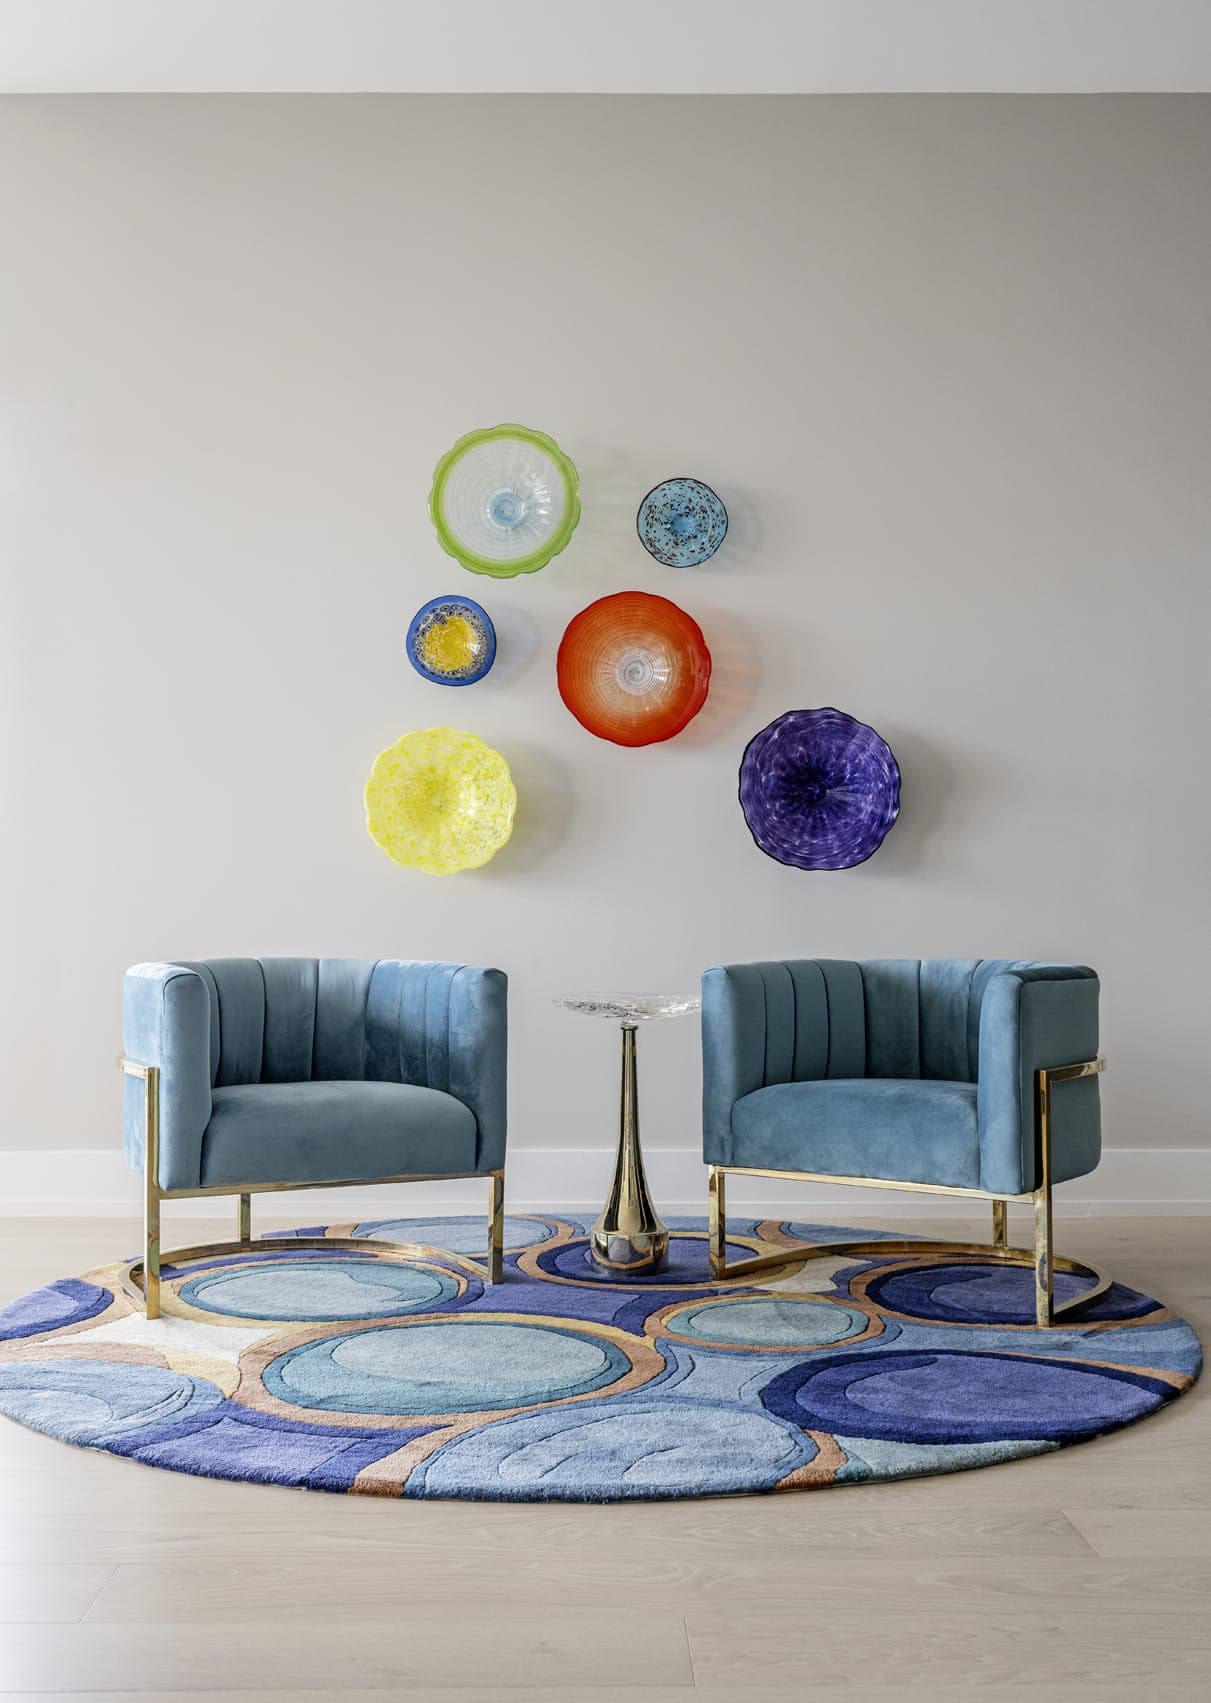 Turquois Blue Suede Armchairs With Gold Frame Colourful Glass Wall Displays Grey Painted Wall